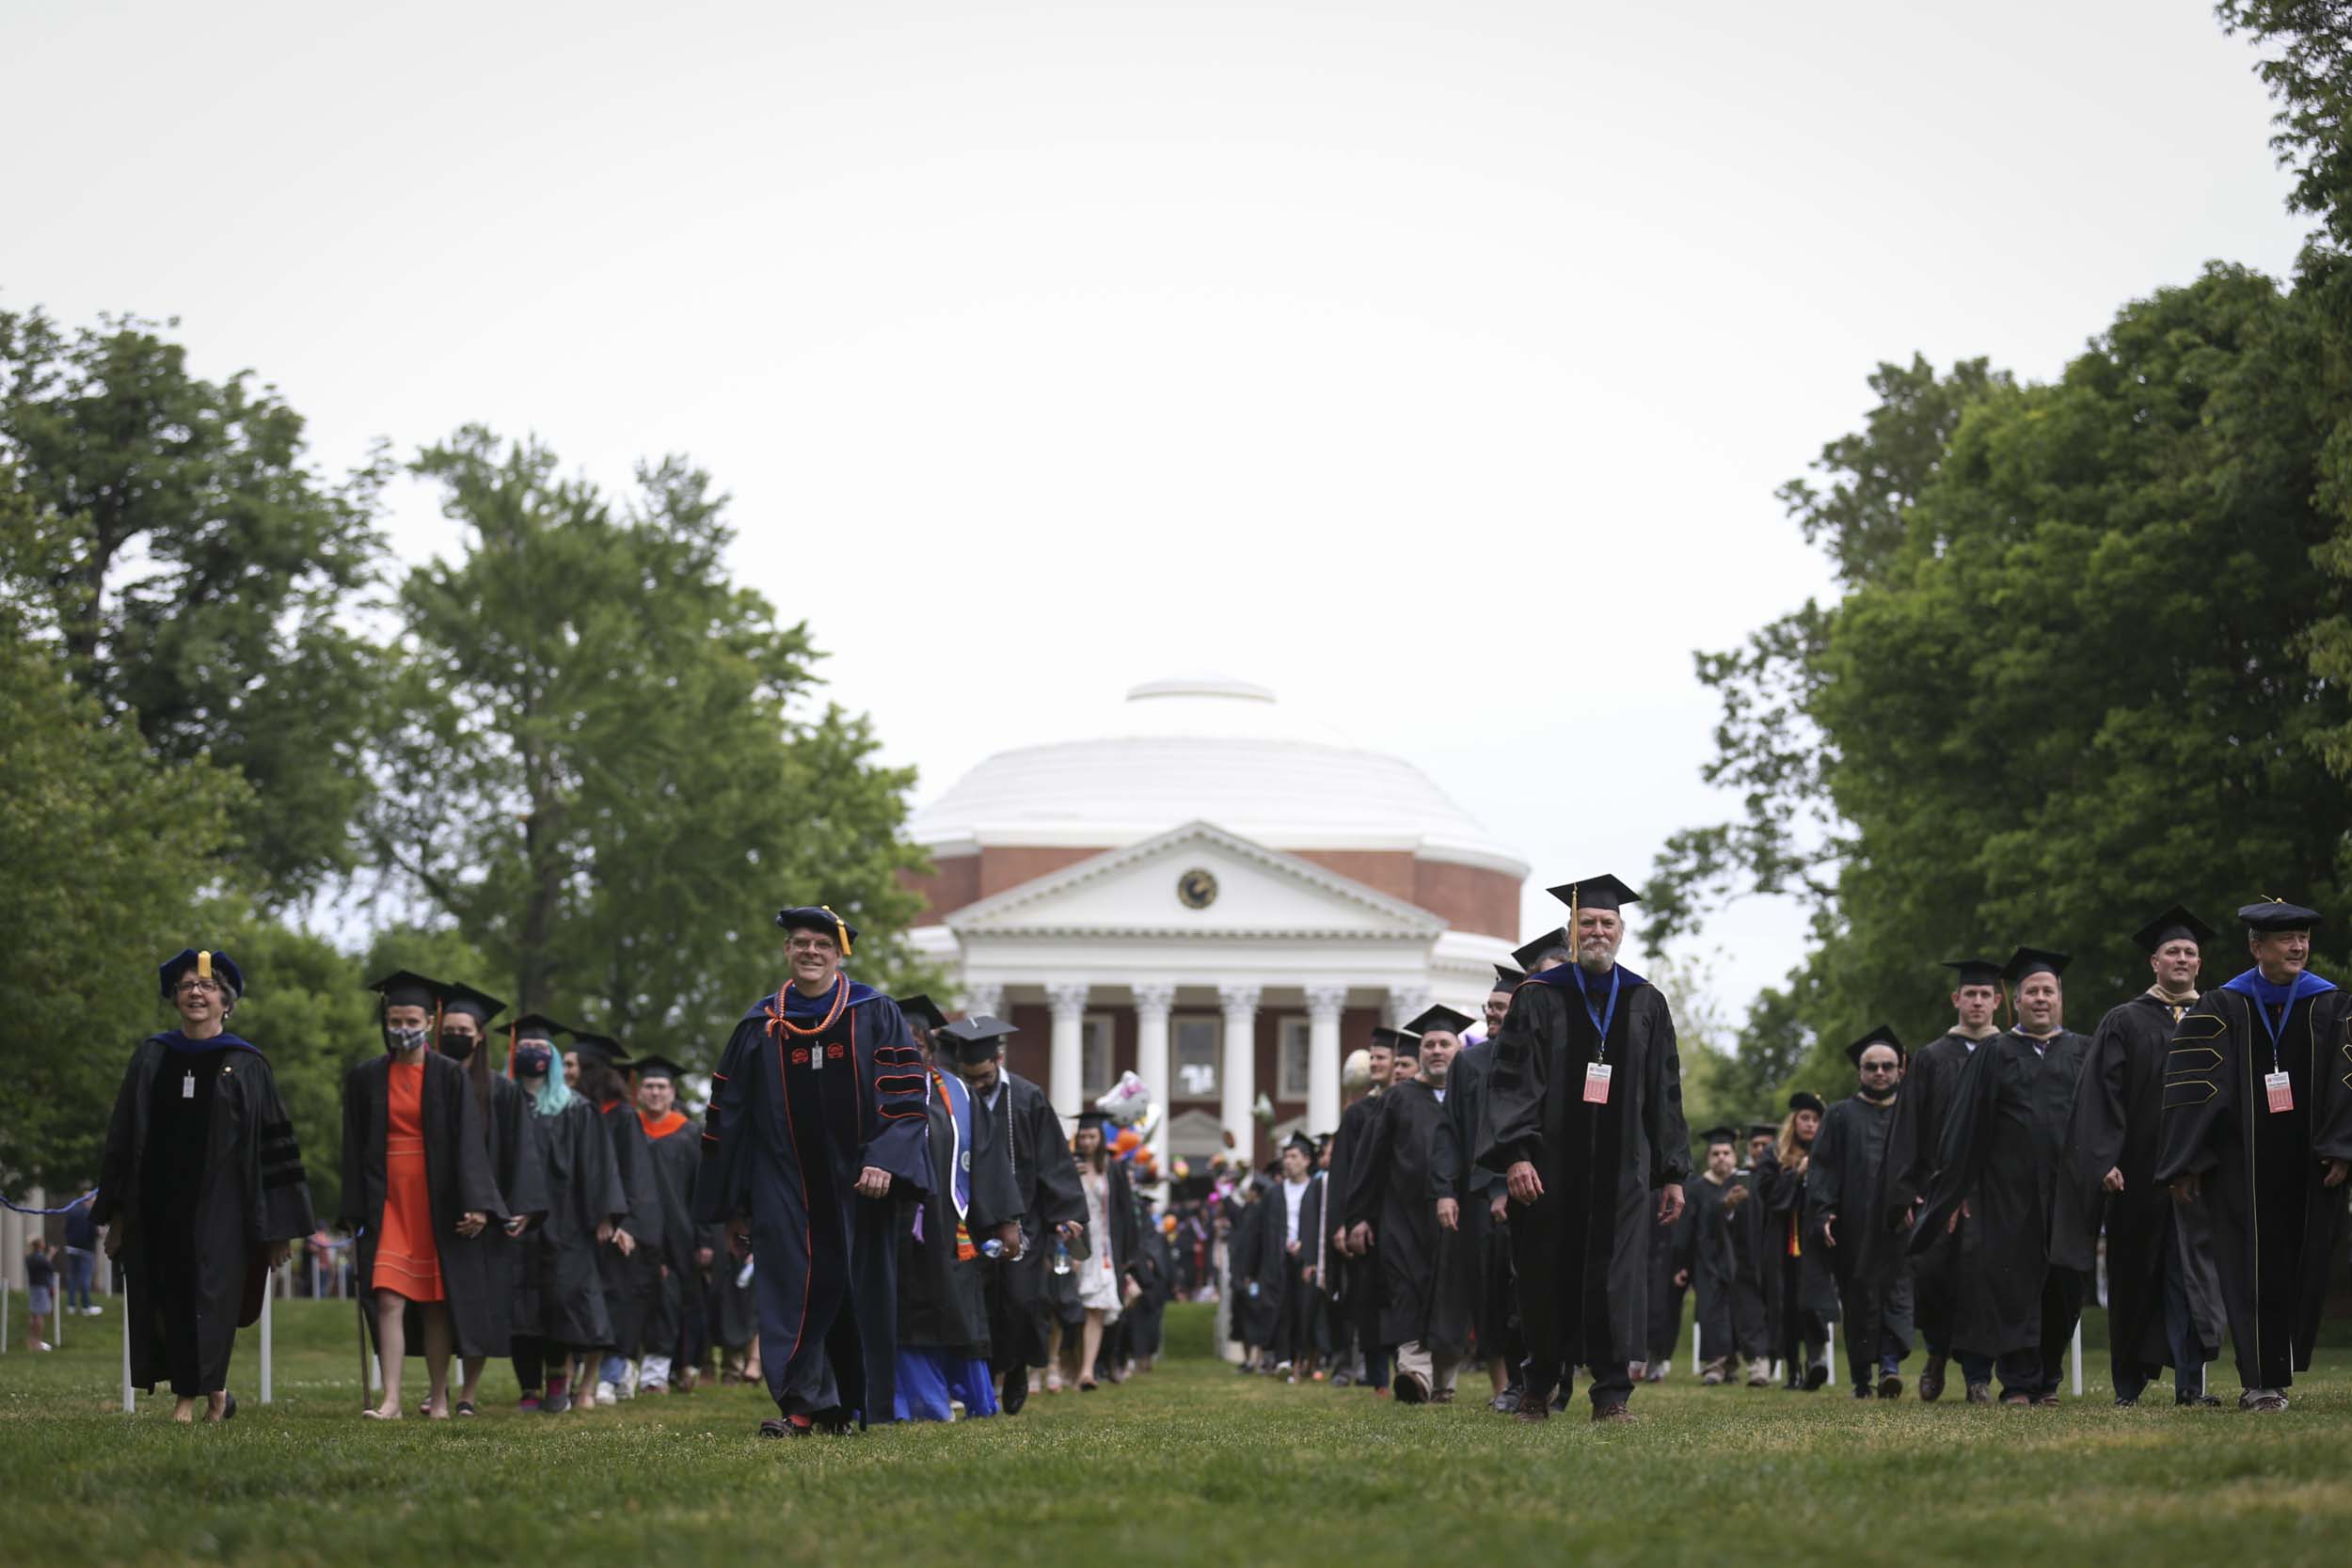 UVA faculty, Executive Leadership, and students walking across the Lawn from the Rotunda